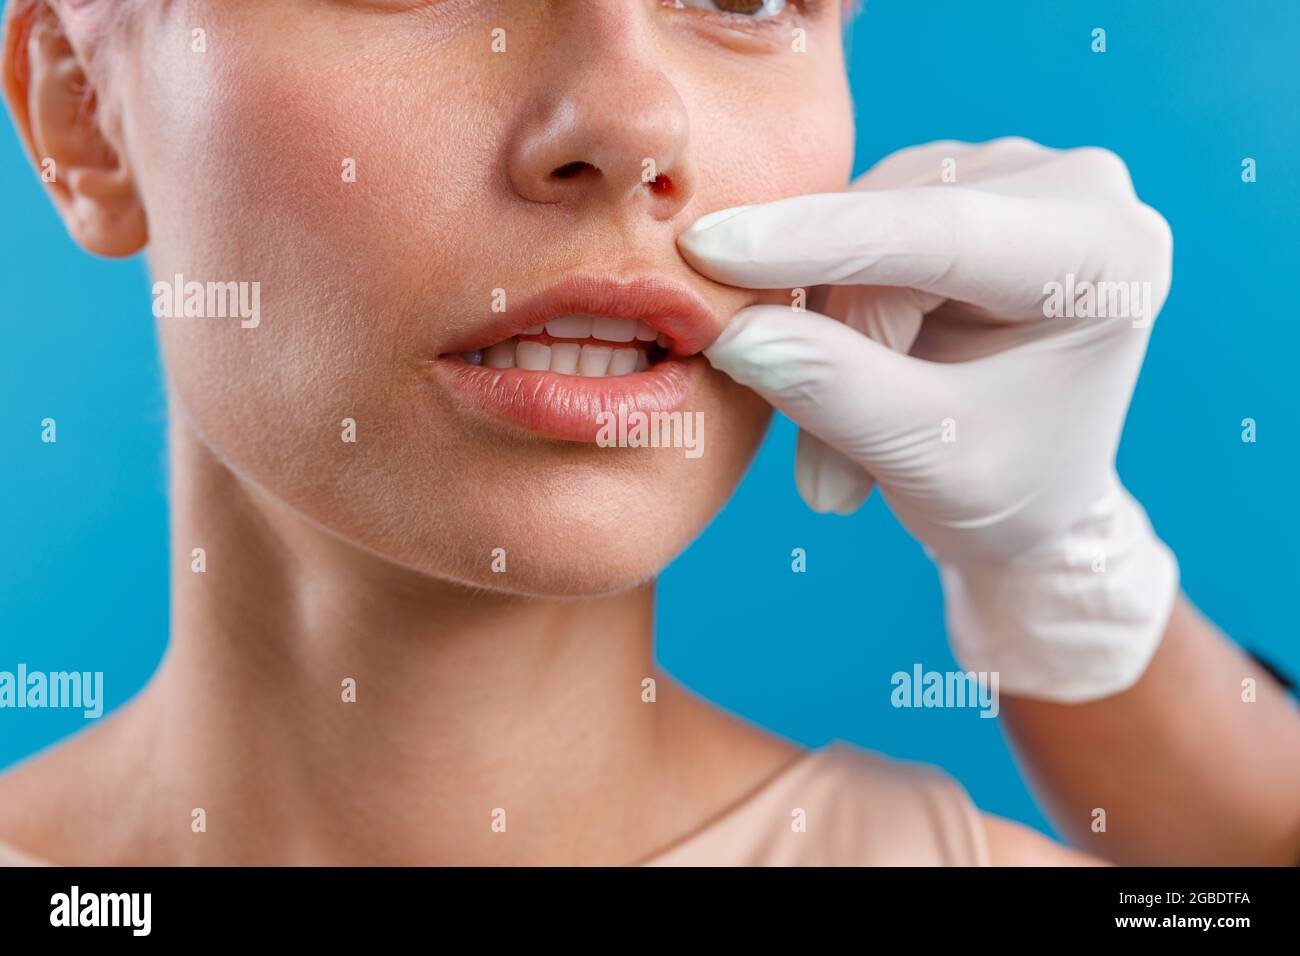 Hand of beautician touching female lips, examining face before giving botox injection Stock Photo